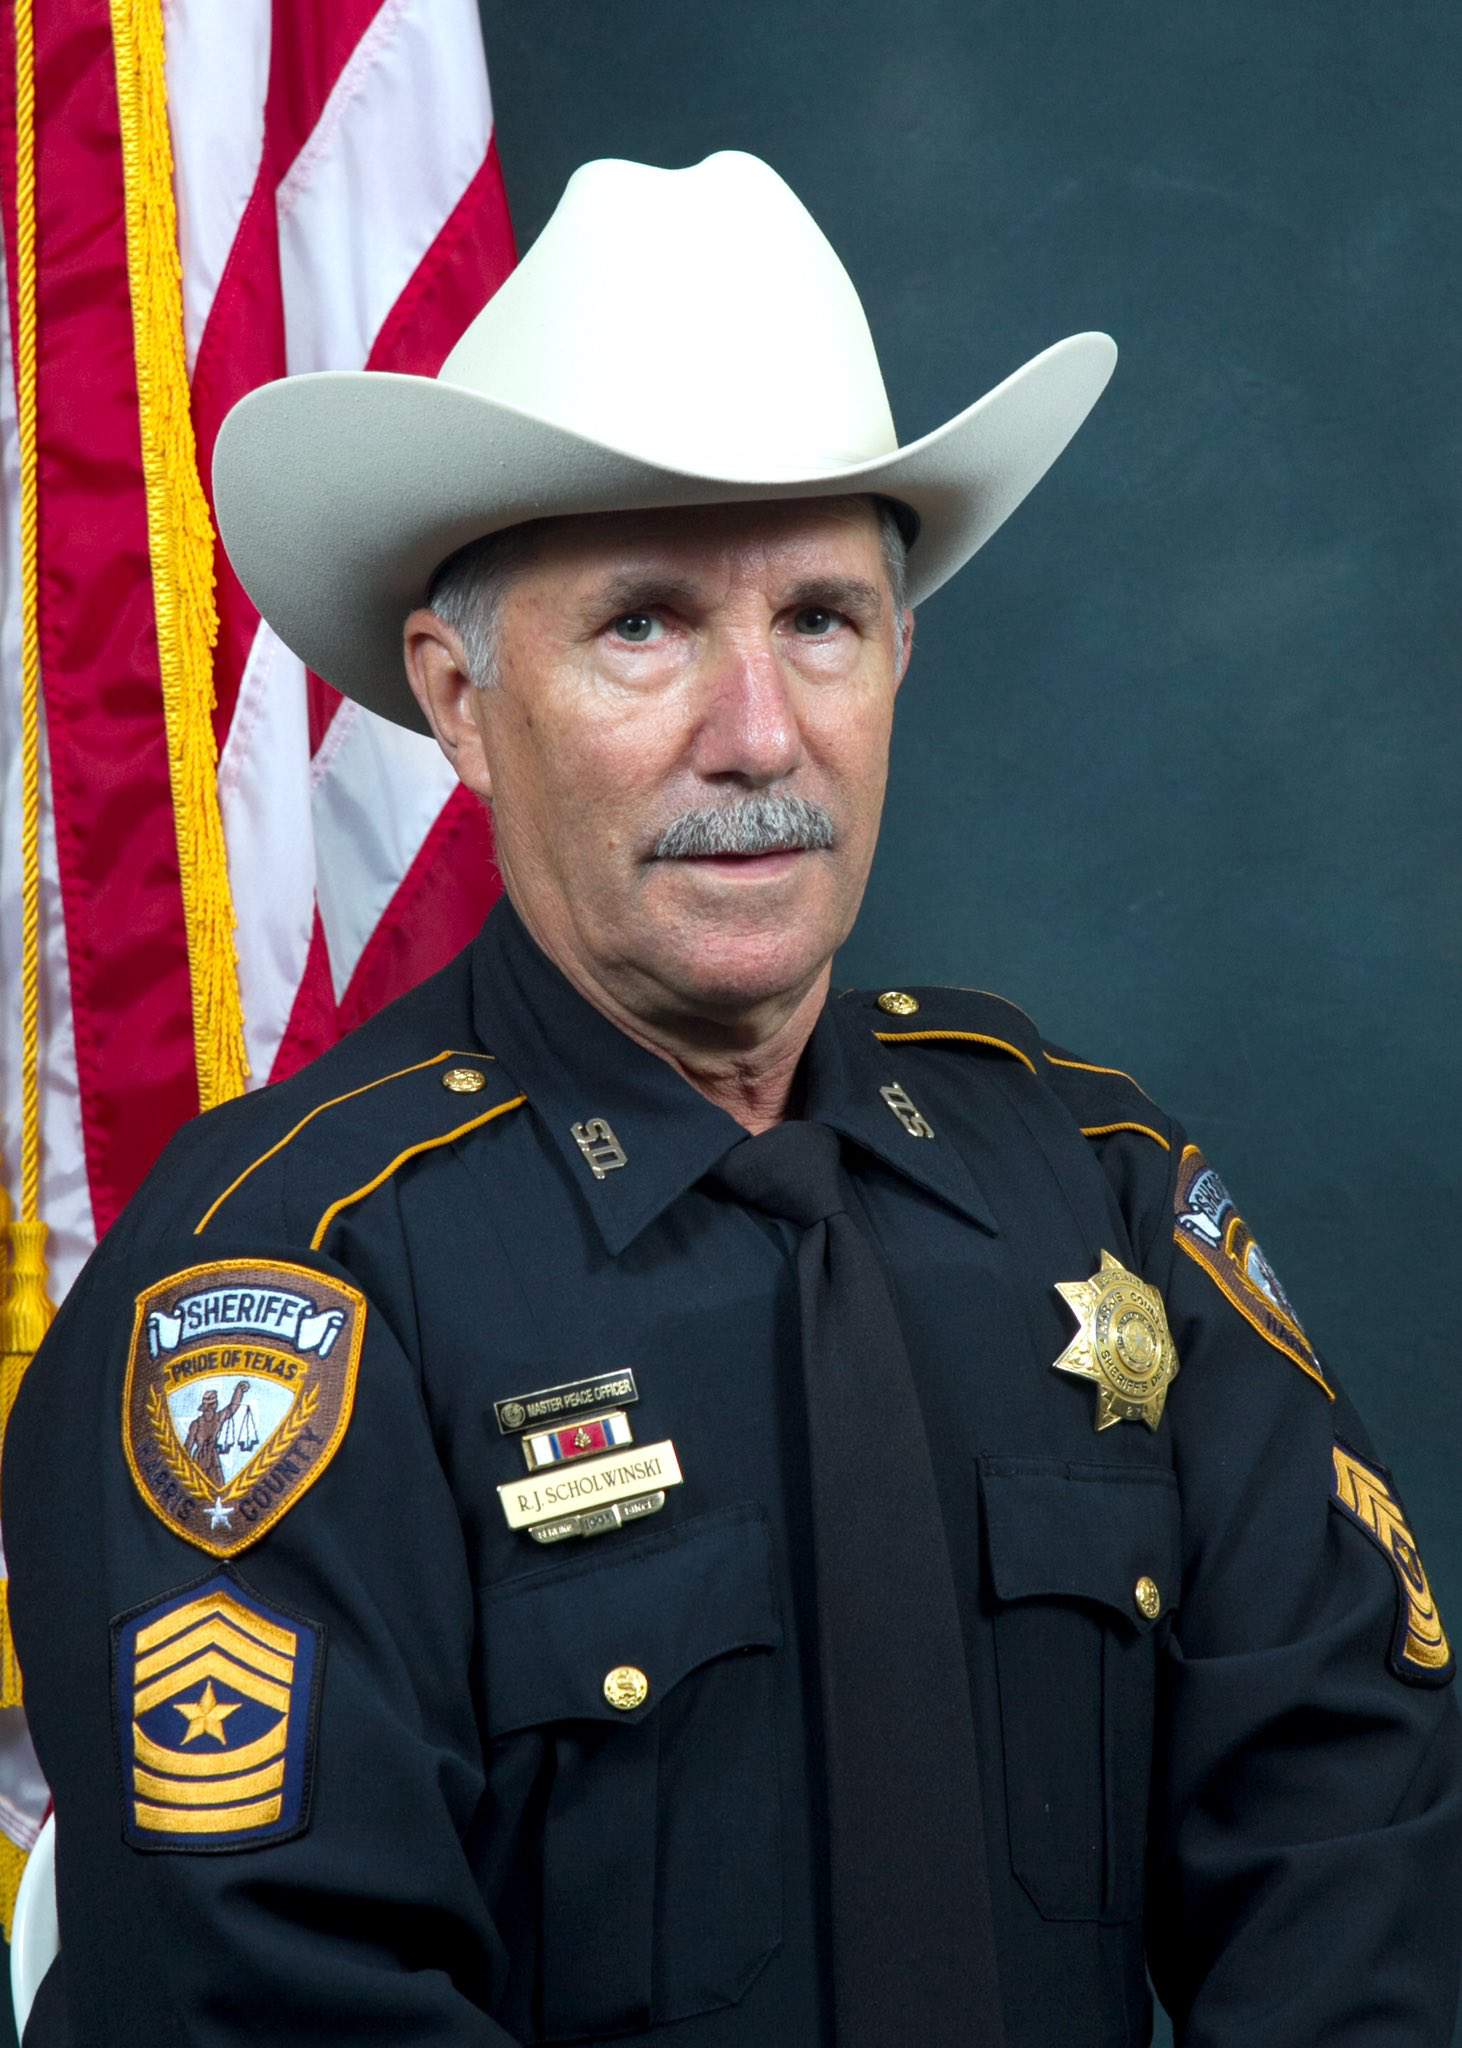 Funeral details released for HCSO Sgt. Raymond Scholwinski, who died after contracting COVID-19